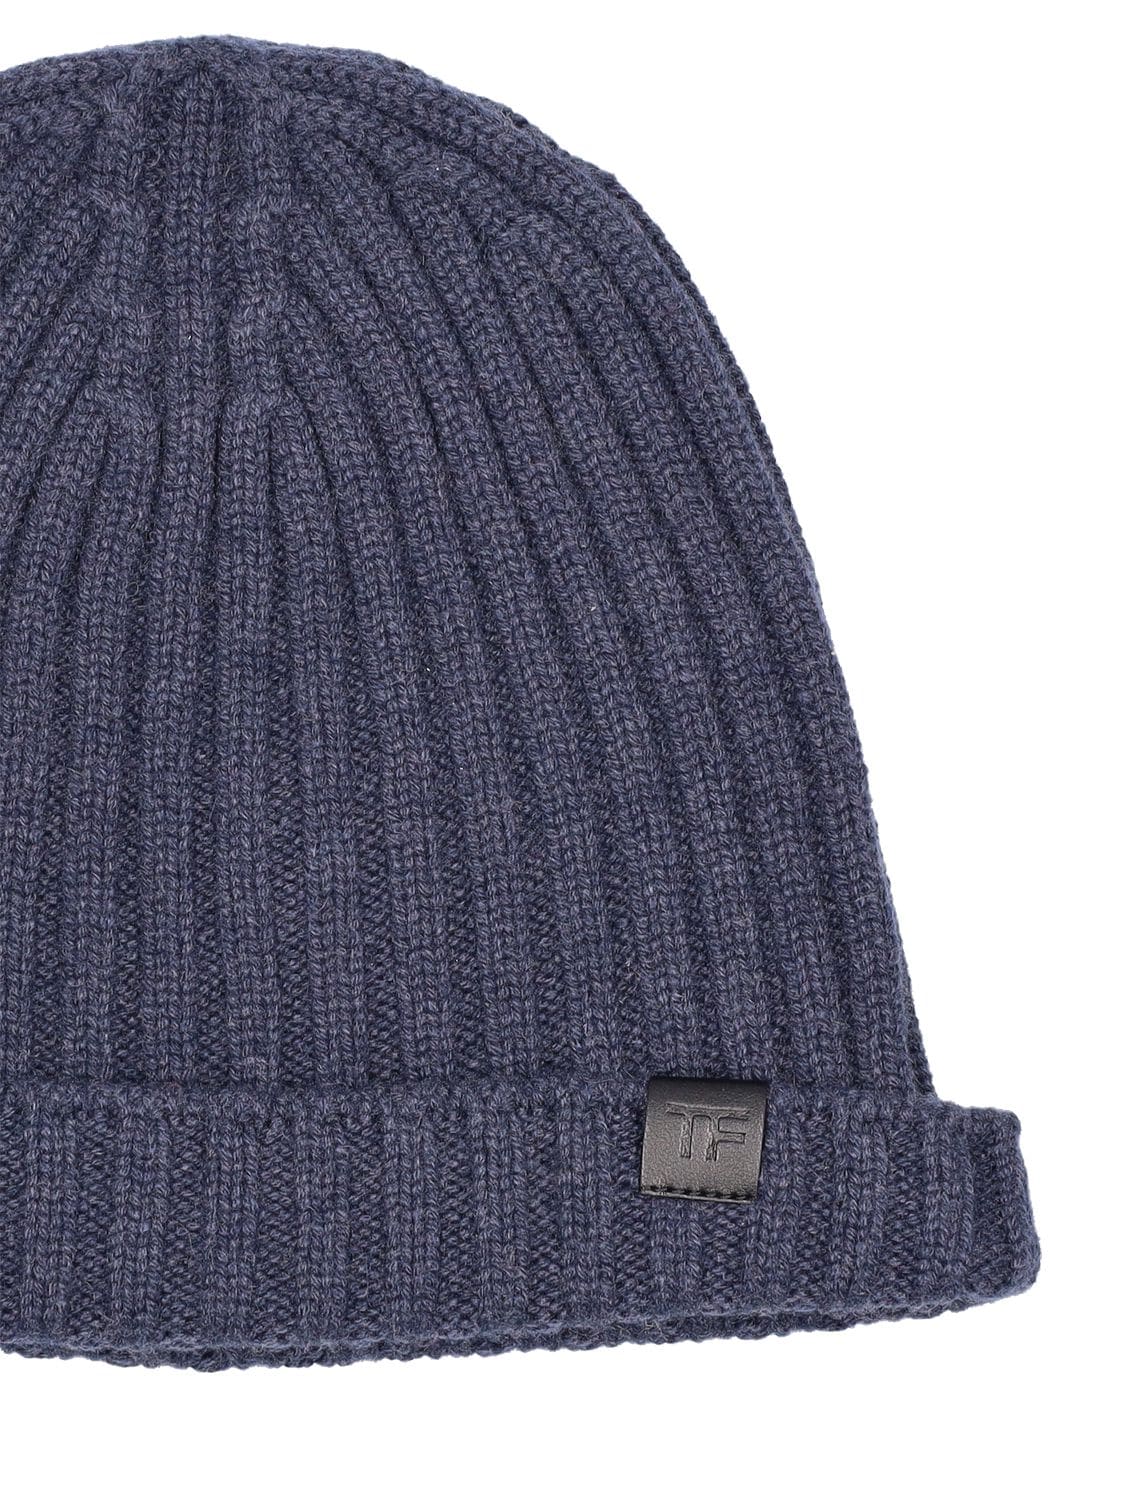 Shop Tom Ford Cashmere Ribbed Beanie Hat In Blue